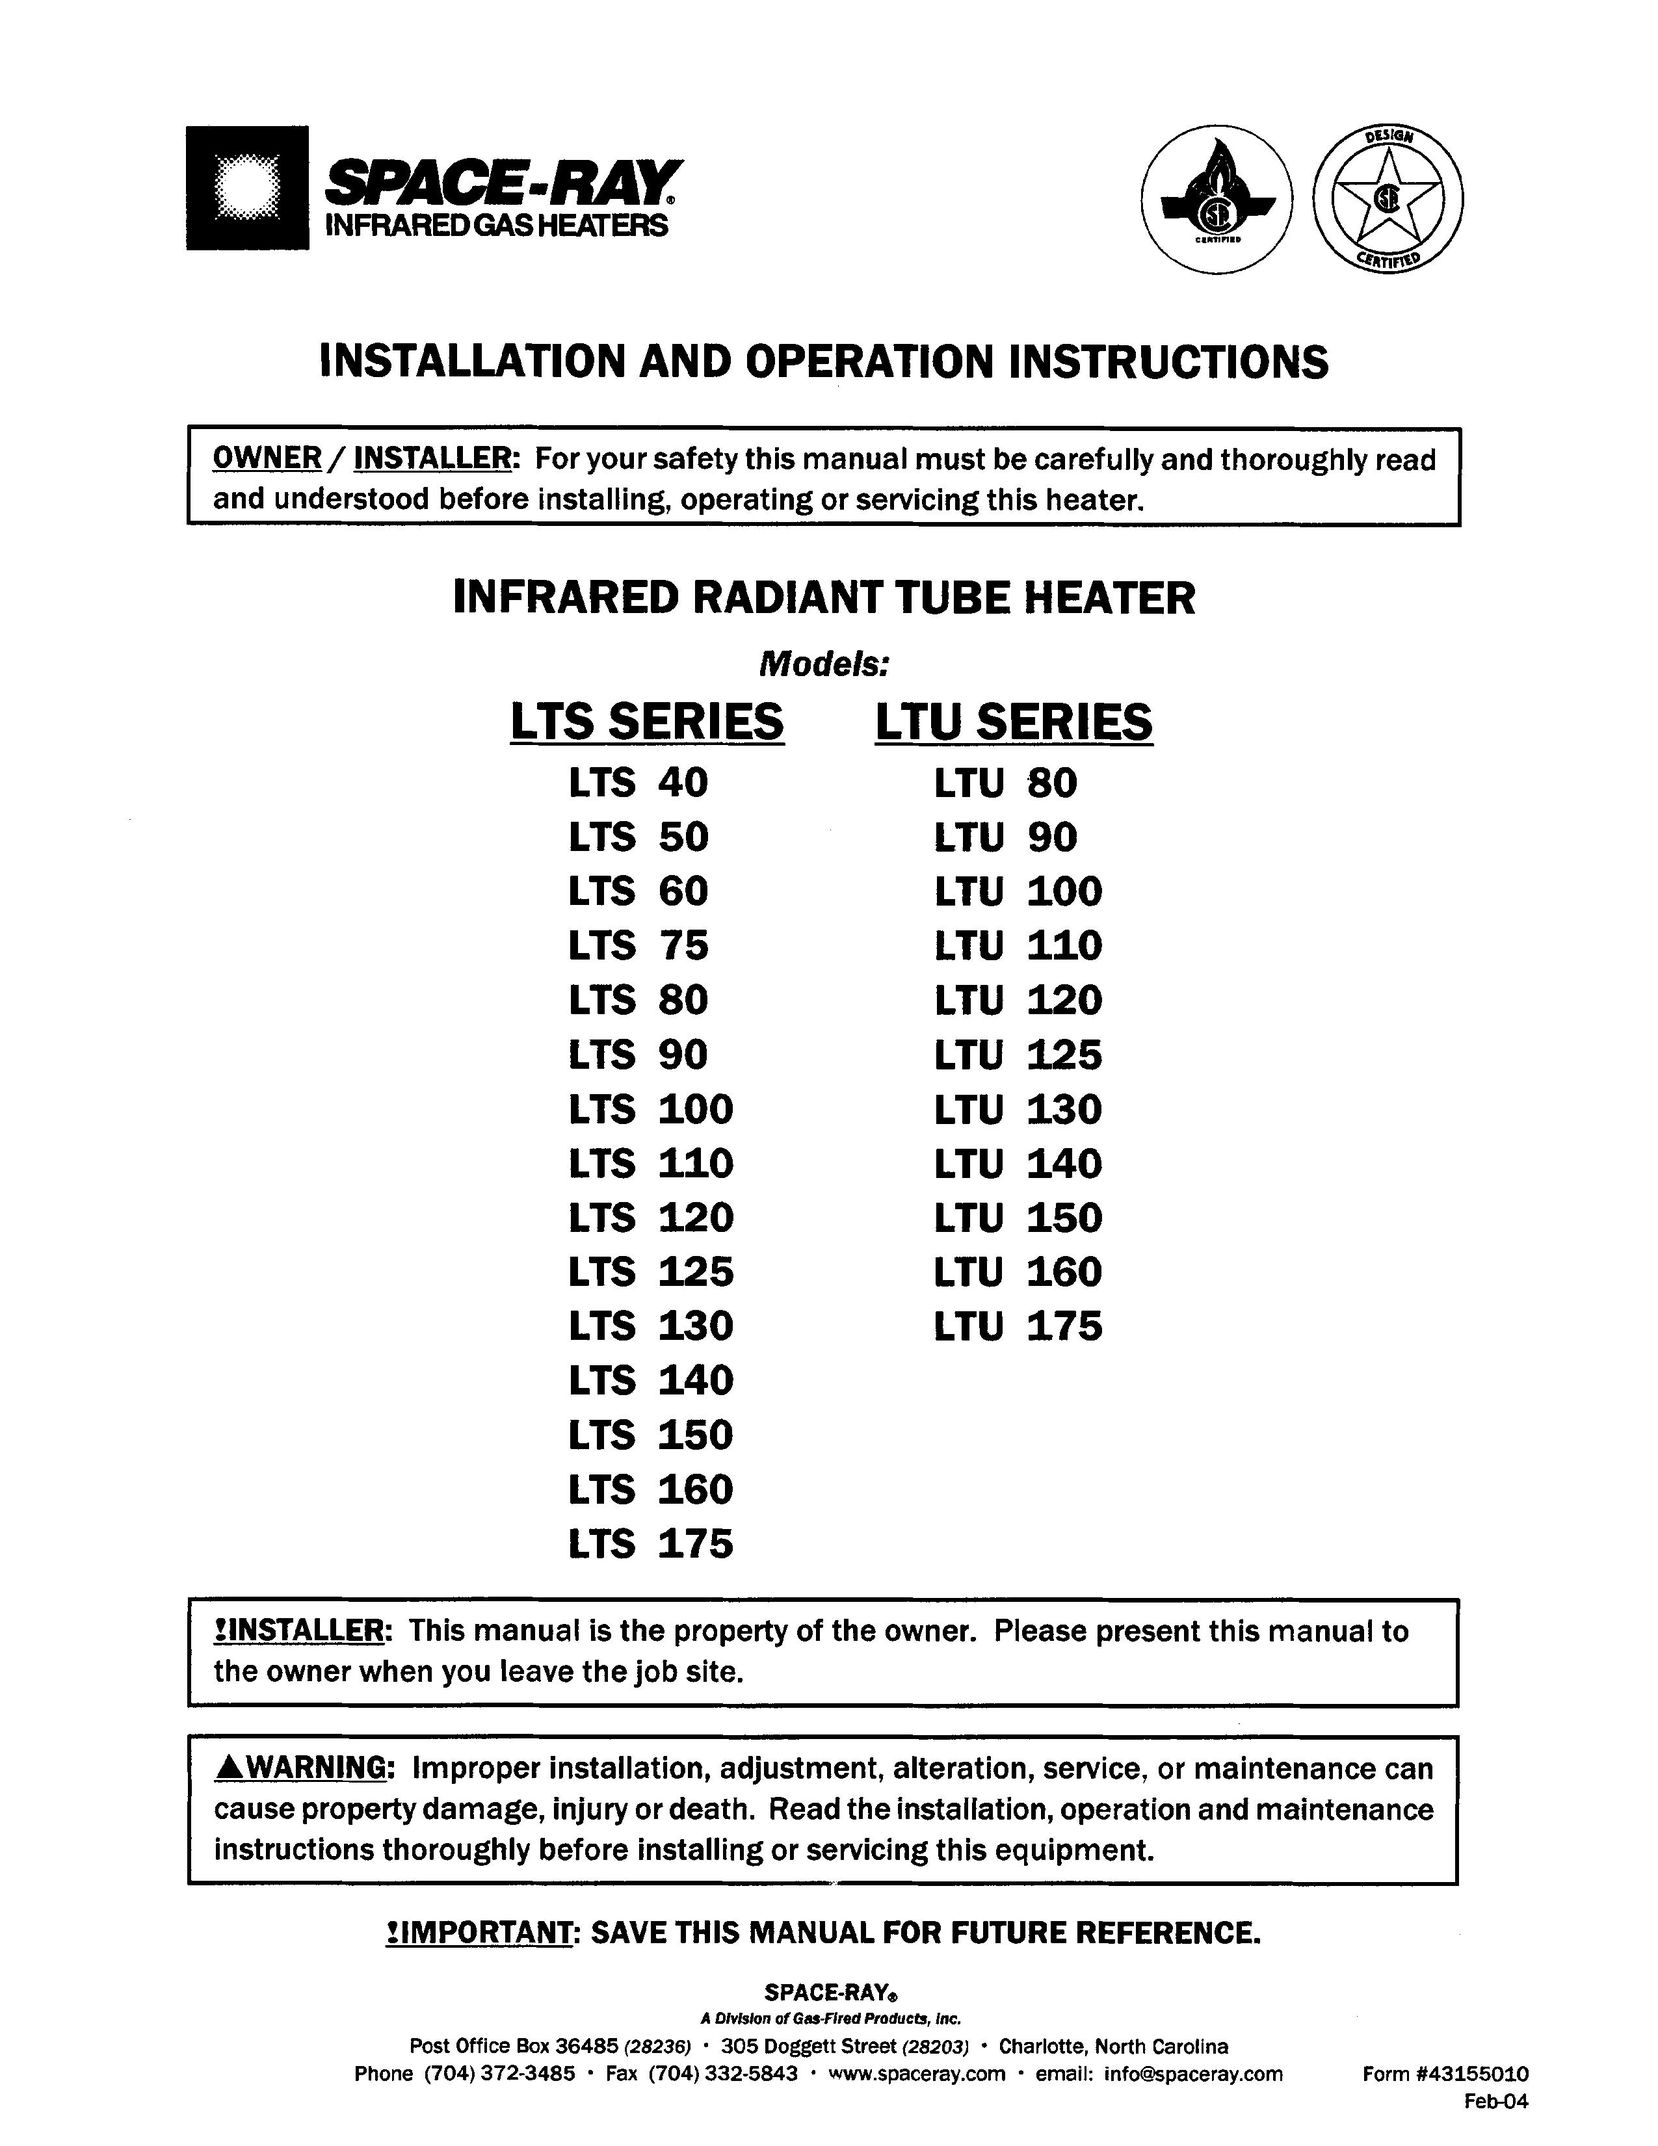 Gas-Fired Products LTS 160 Electric Heater User Manual